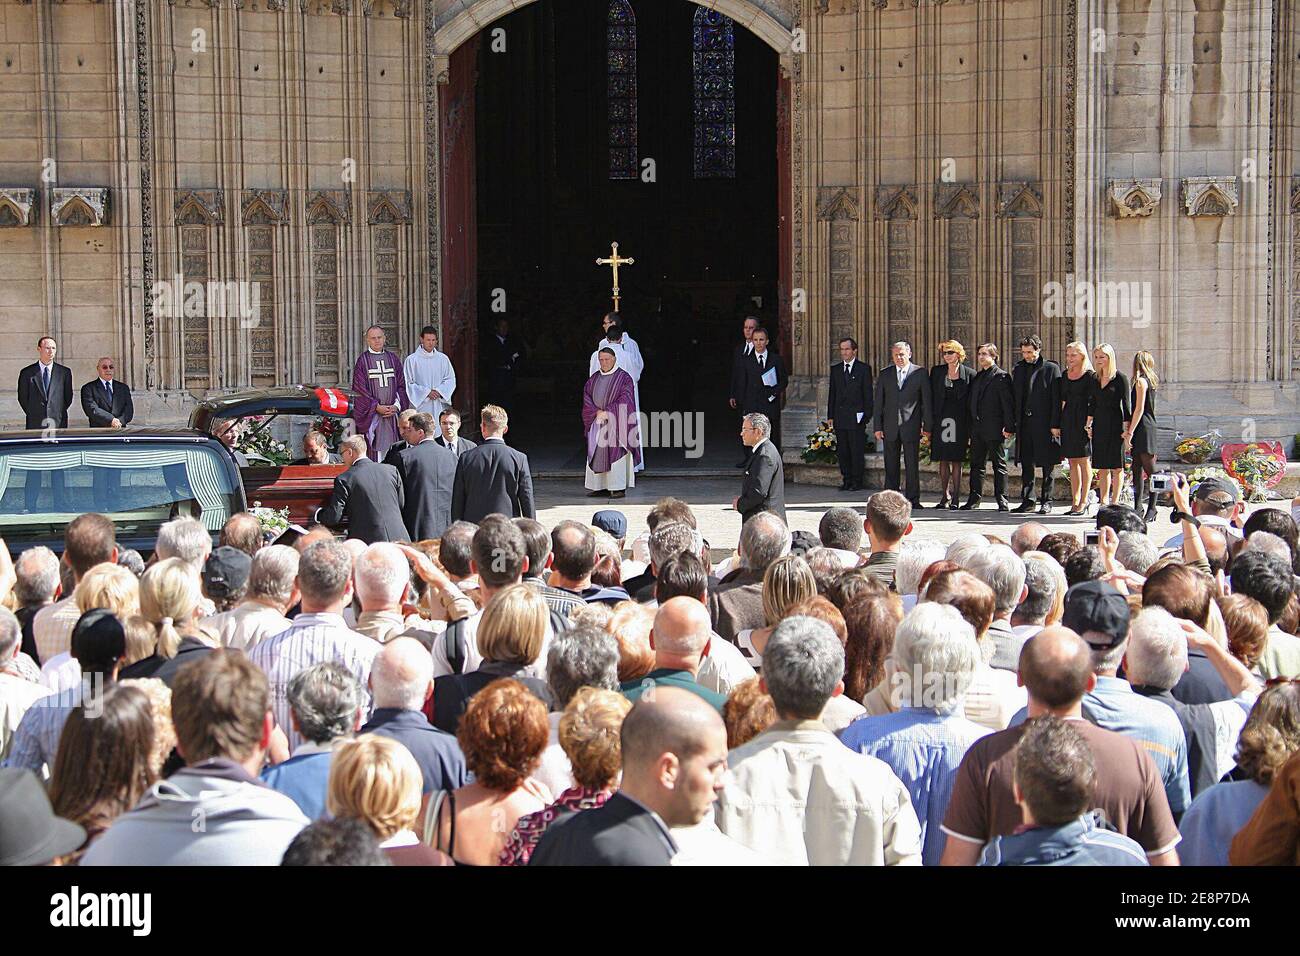 His children, (l to r) David, Elise, Frederic, Jean-Baptiste, Judith, Jeanne-Marie and Juliette look the coffin of their father, TV anchor Jacques Martin, being carried inside Saint-Jean Cathedral, in Lyon, France on September 20, 2007. Photo by Bernard-Dargent-Khayat-Nebinger/ABACAPRESS.COM Stock Photo